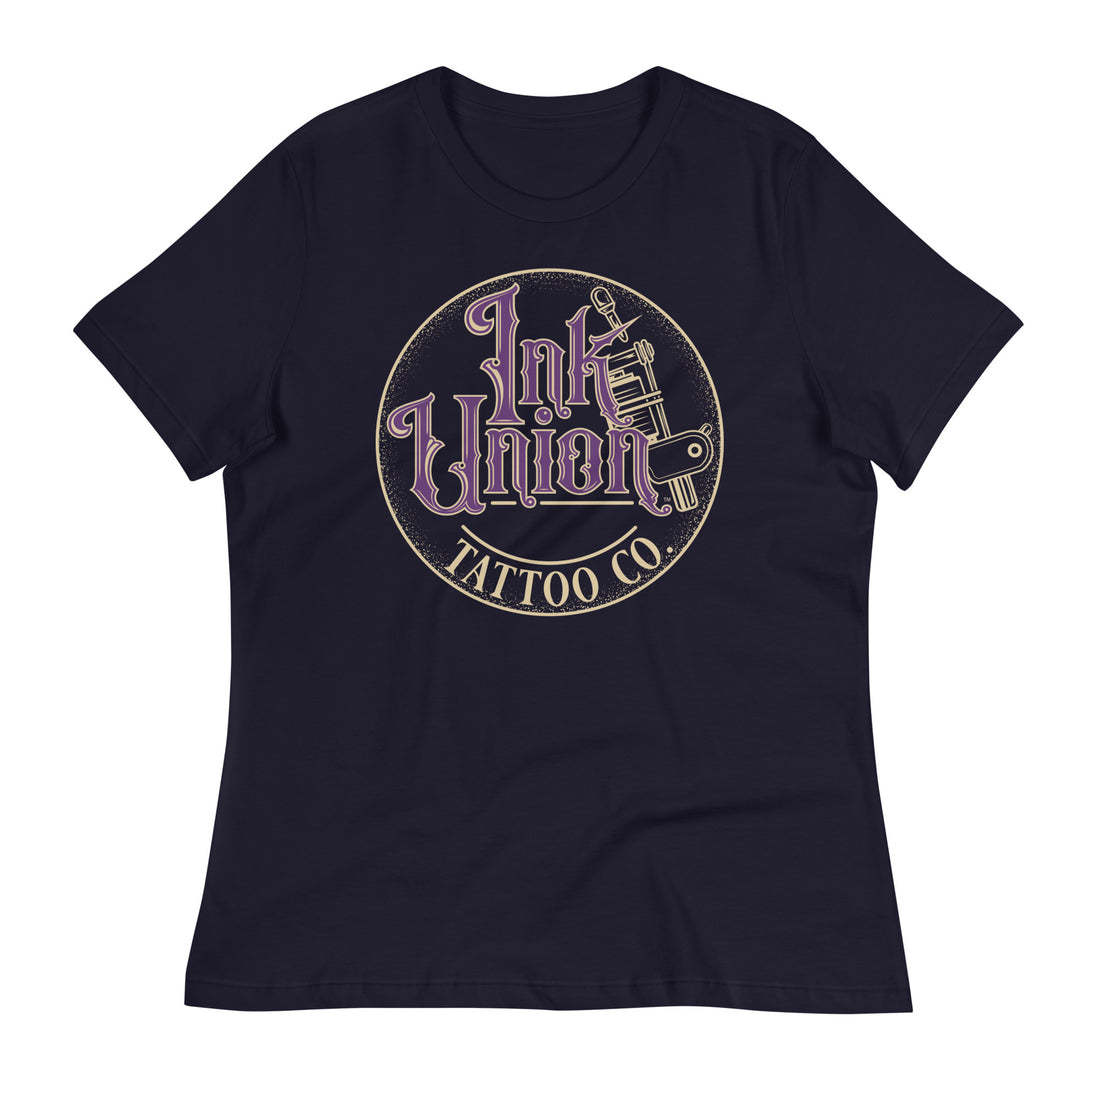 A navy blue t-shirt with a gold circle containing fancy lettering in purple and gold that says Ink Union and a gold tattoo machine peeking out from behind on the right side.  There is a dot work gradient inside the circle, and the words Tattoo Co. in gold are at the bottom of the design.